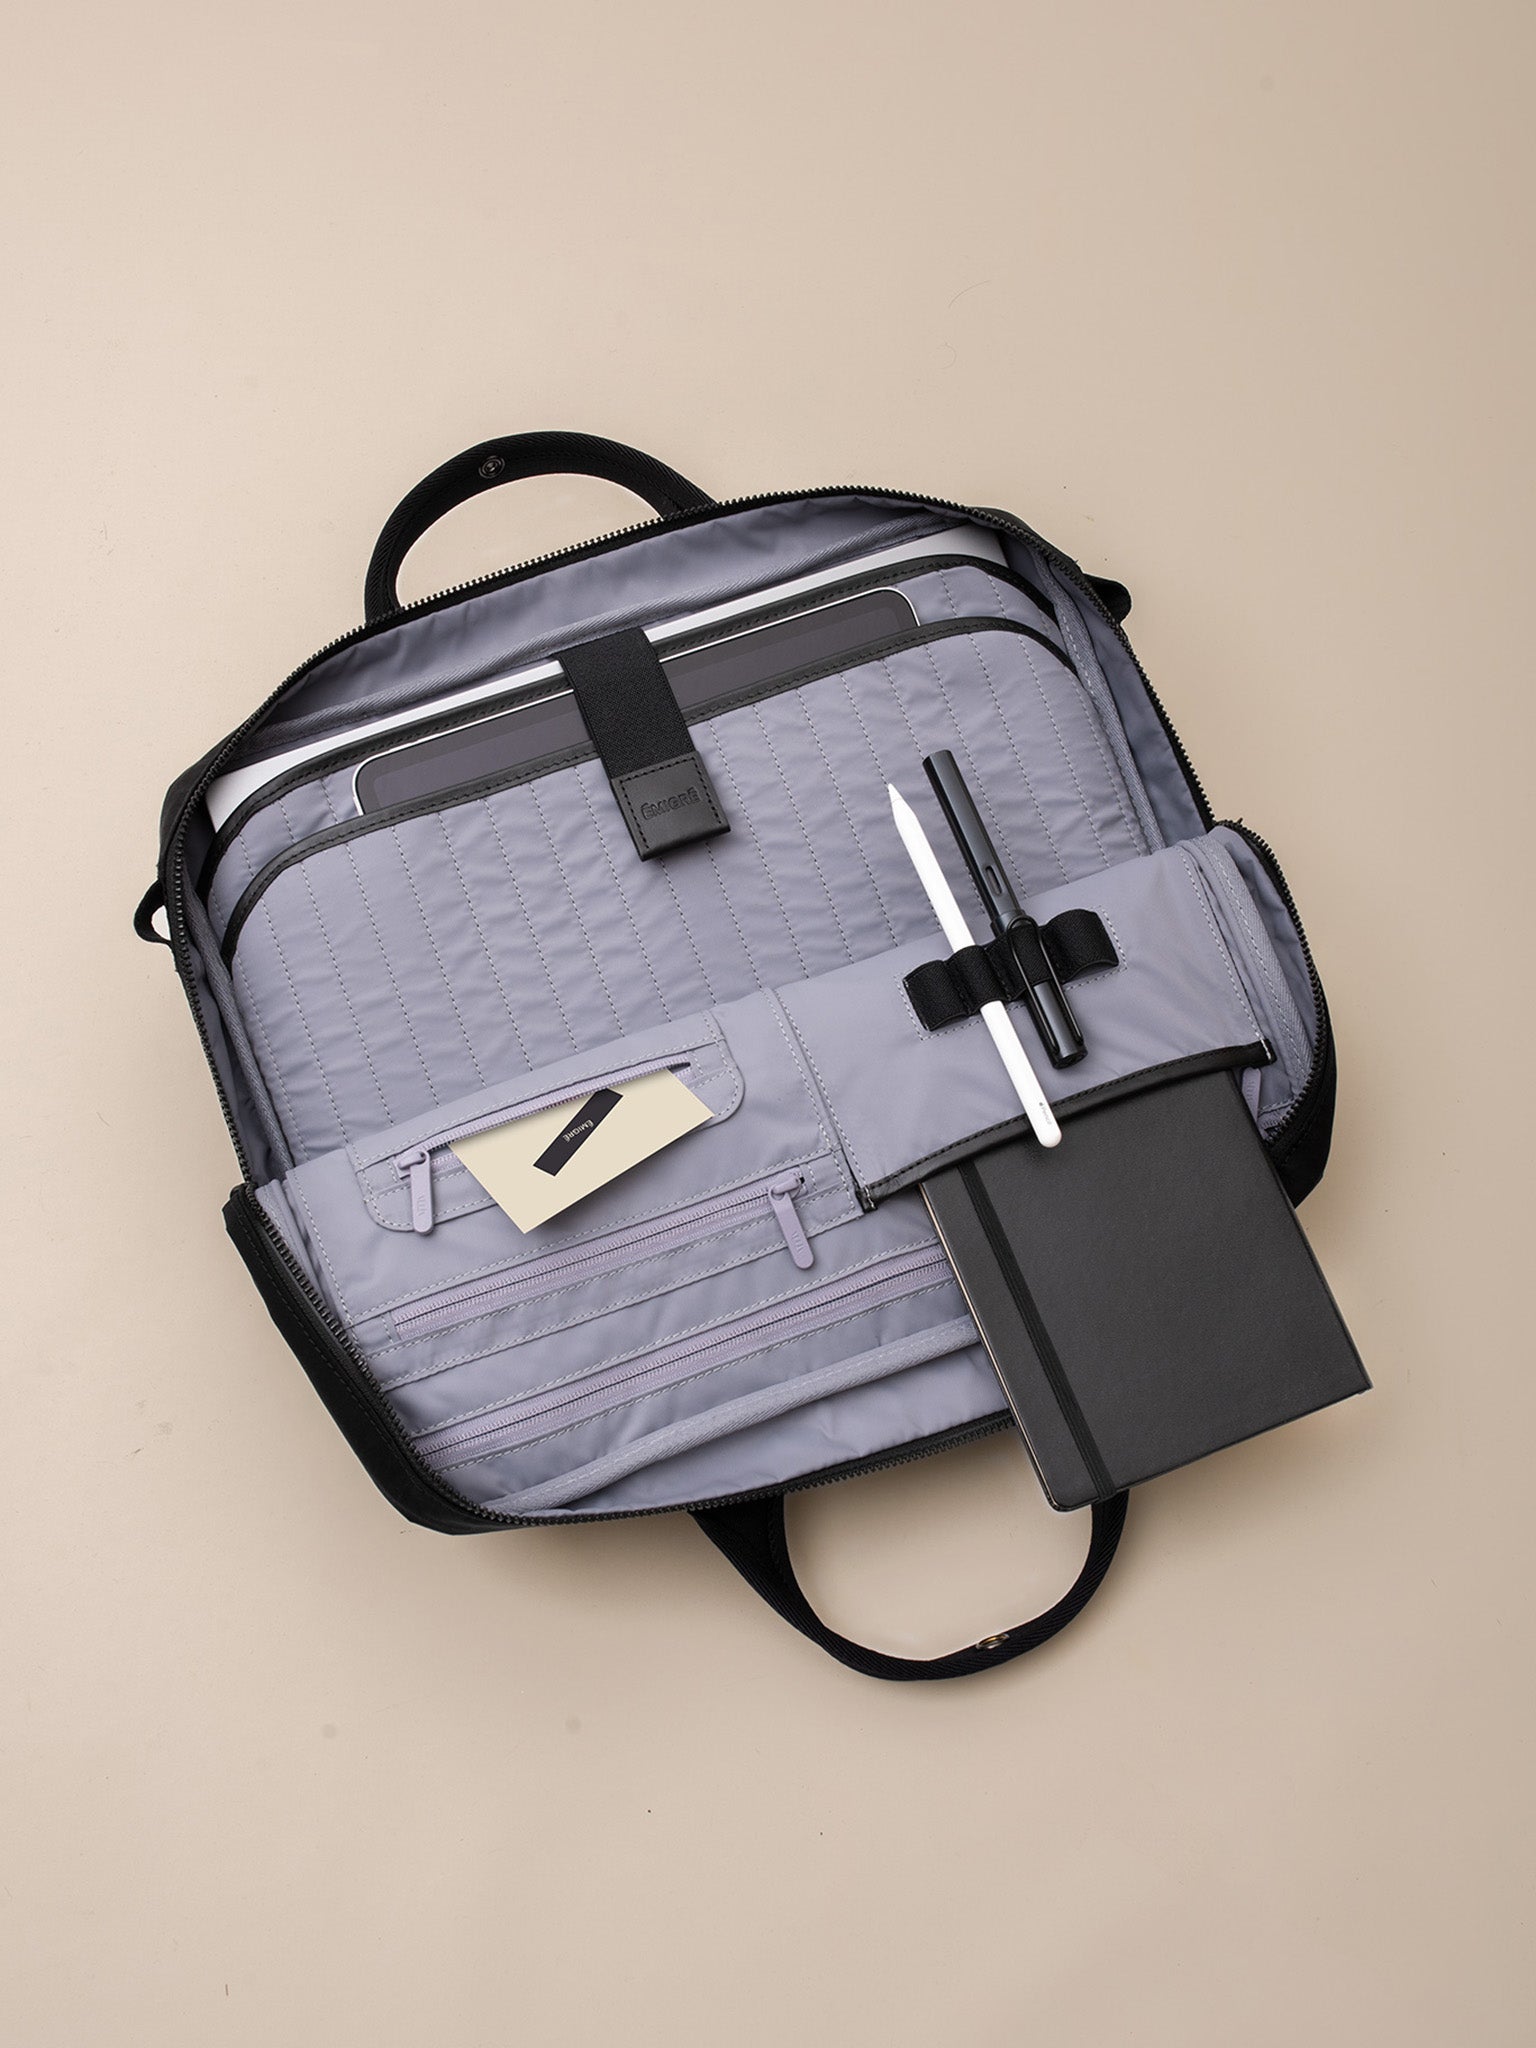 A modern and functional briefcase for men with a padded laptop compartment.